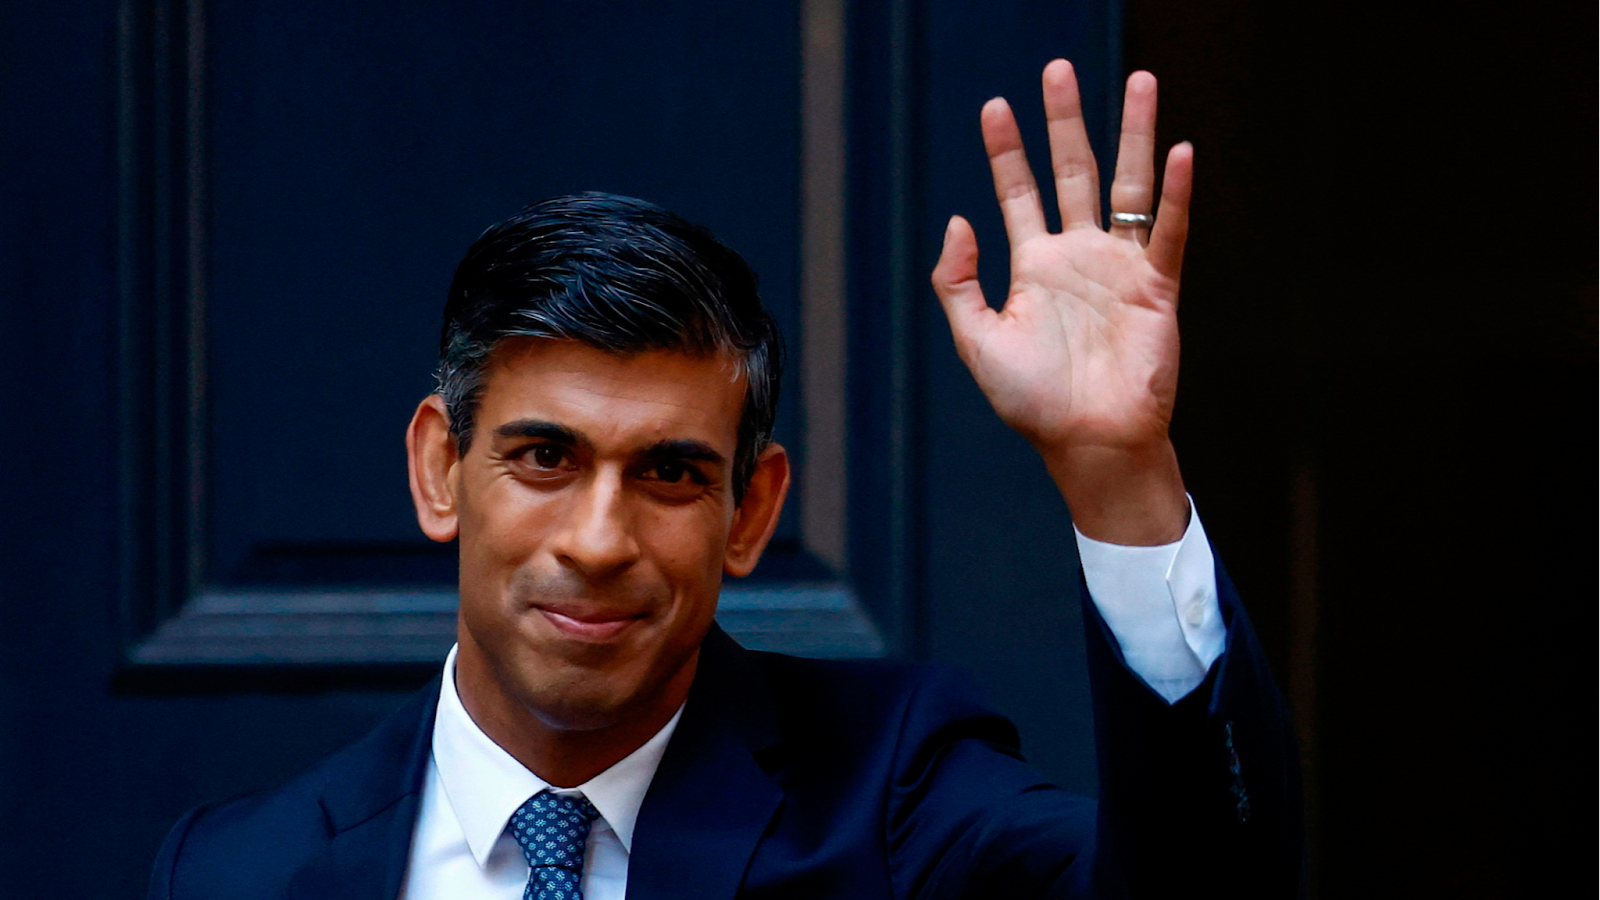 Rise in UK bonds record with Appointment of Rishi Sunak as PM - Asiana Times